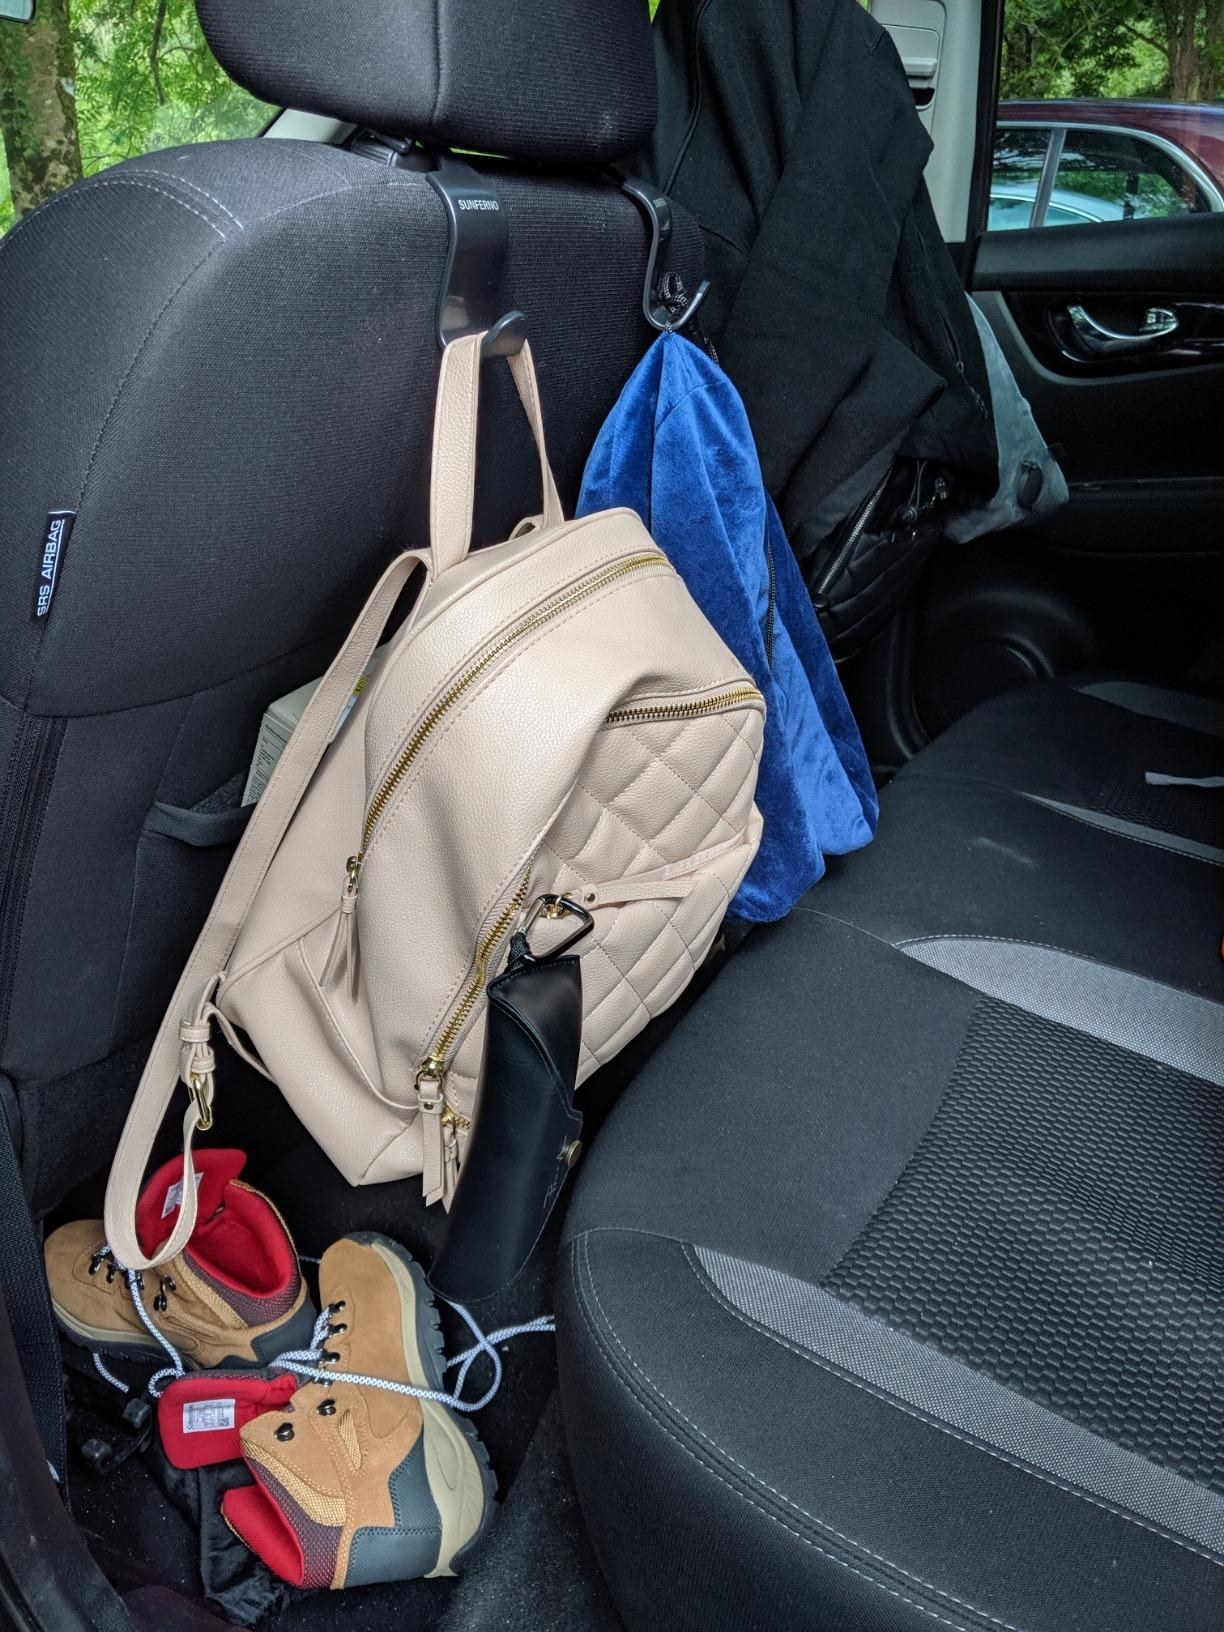 black hooks holding up backpacks and hiking gear behind car seat